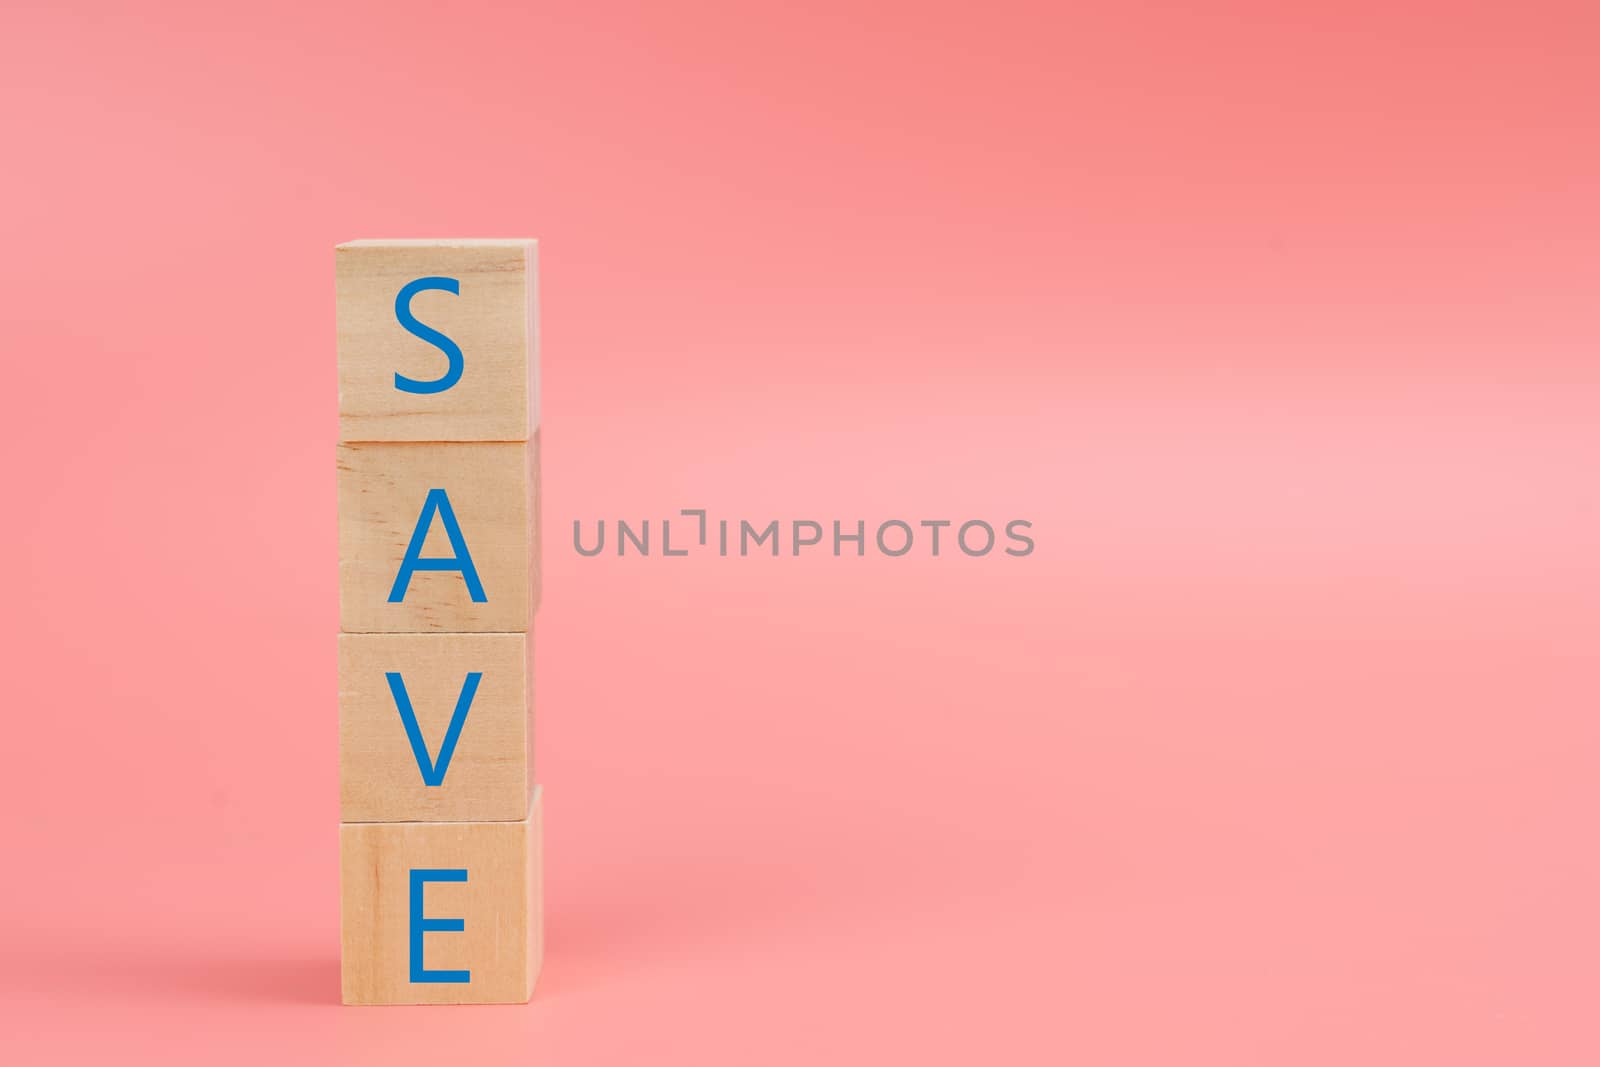 The word SAVE on the wood block on pink background by Buttus_casso